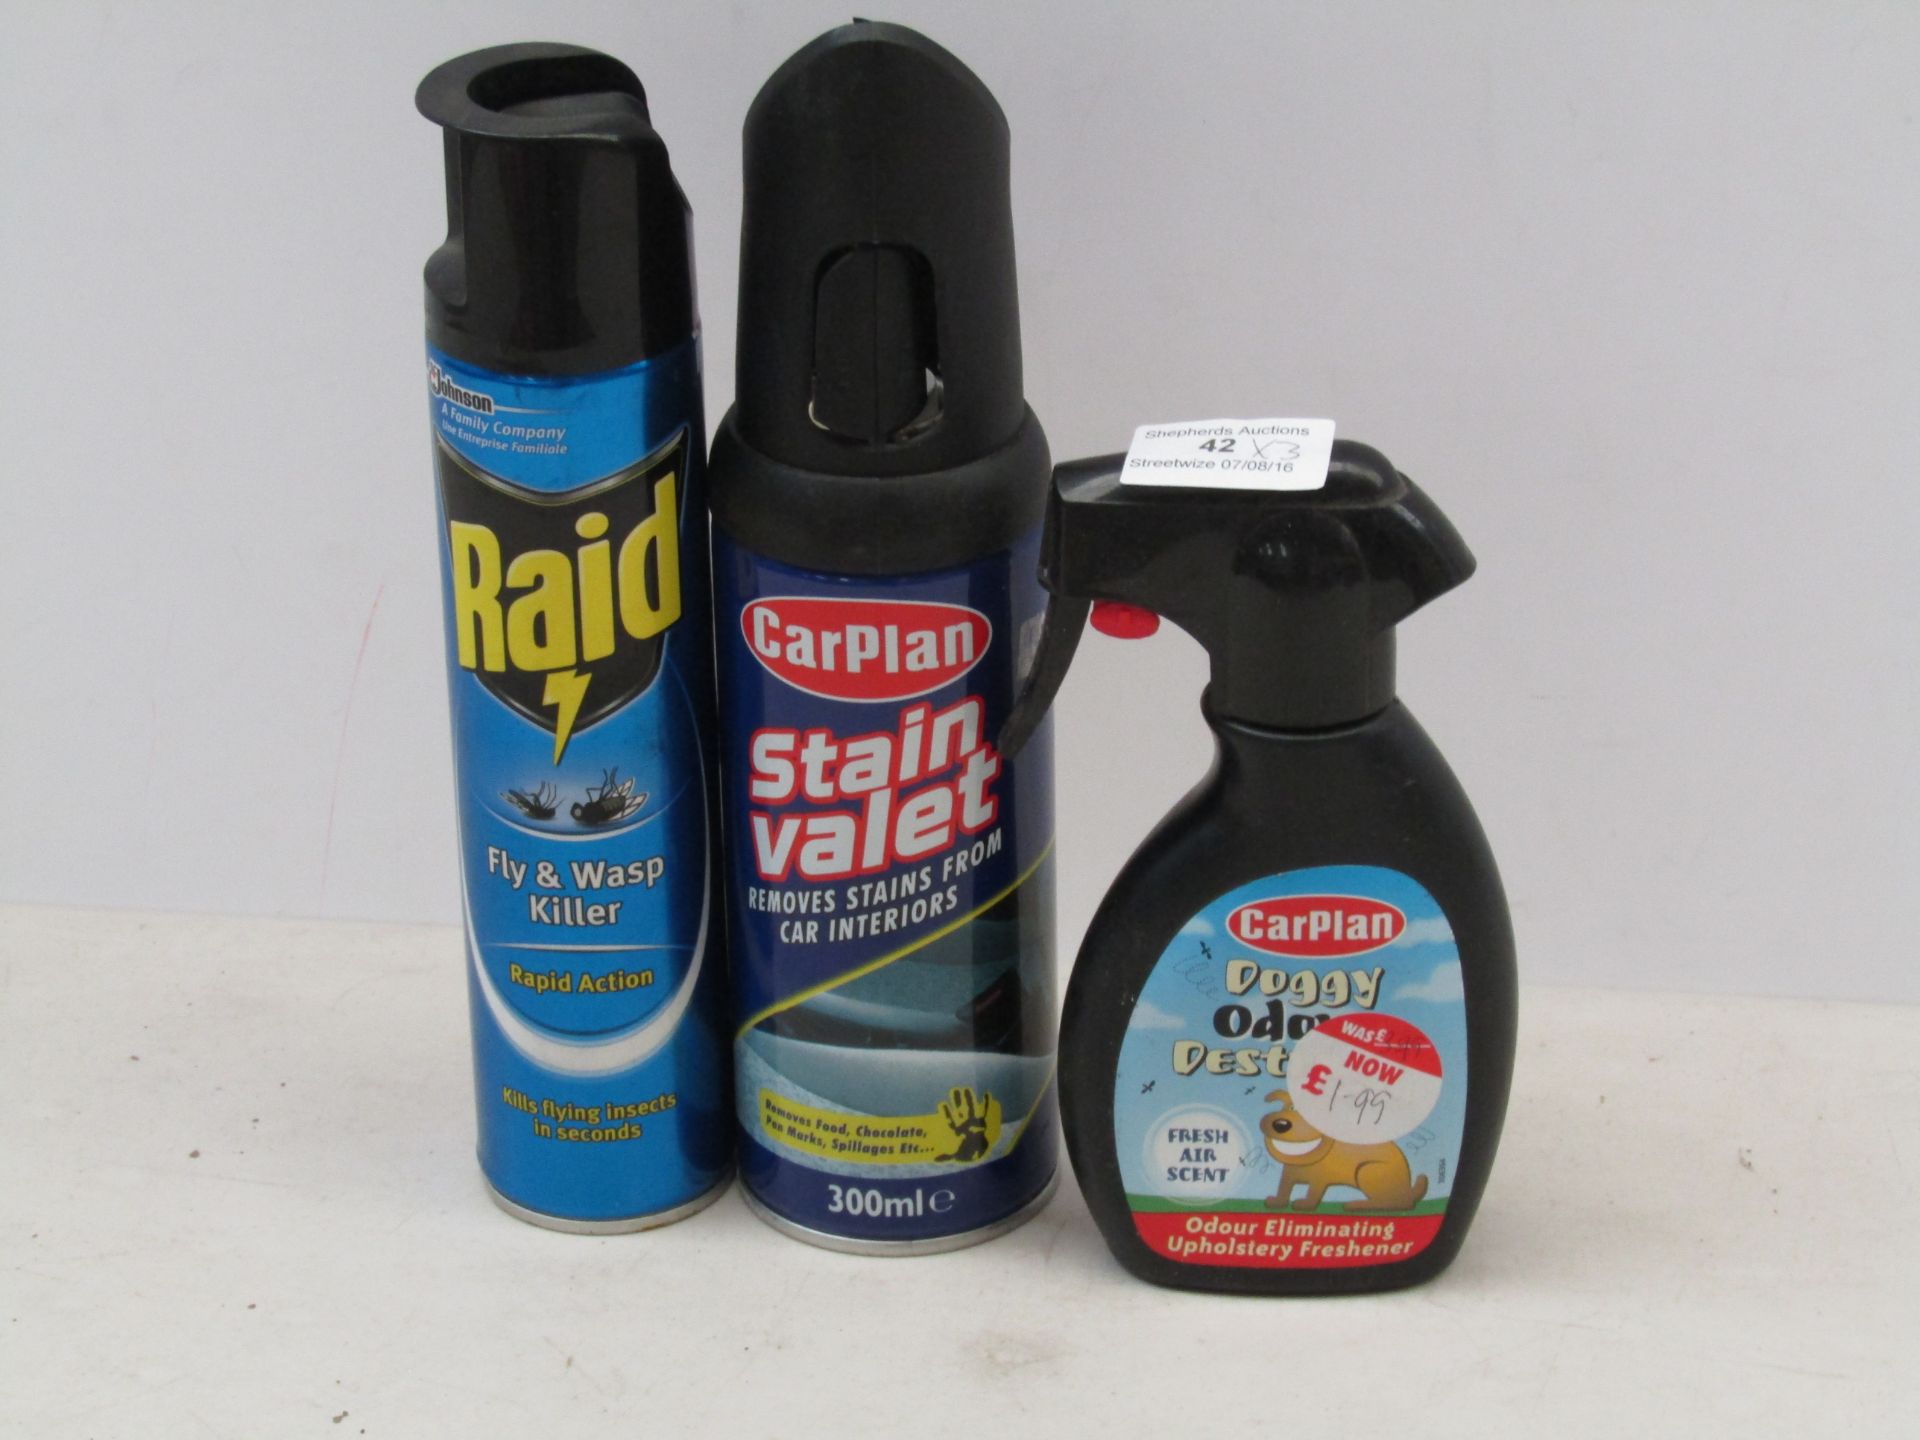 3x Items Being: - 250ml of Doggy Odor Destroyer - 300ml of Raid Fly & Wasp Killer - 300ml of Stain